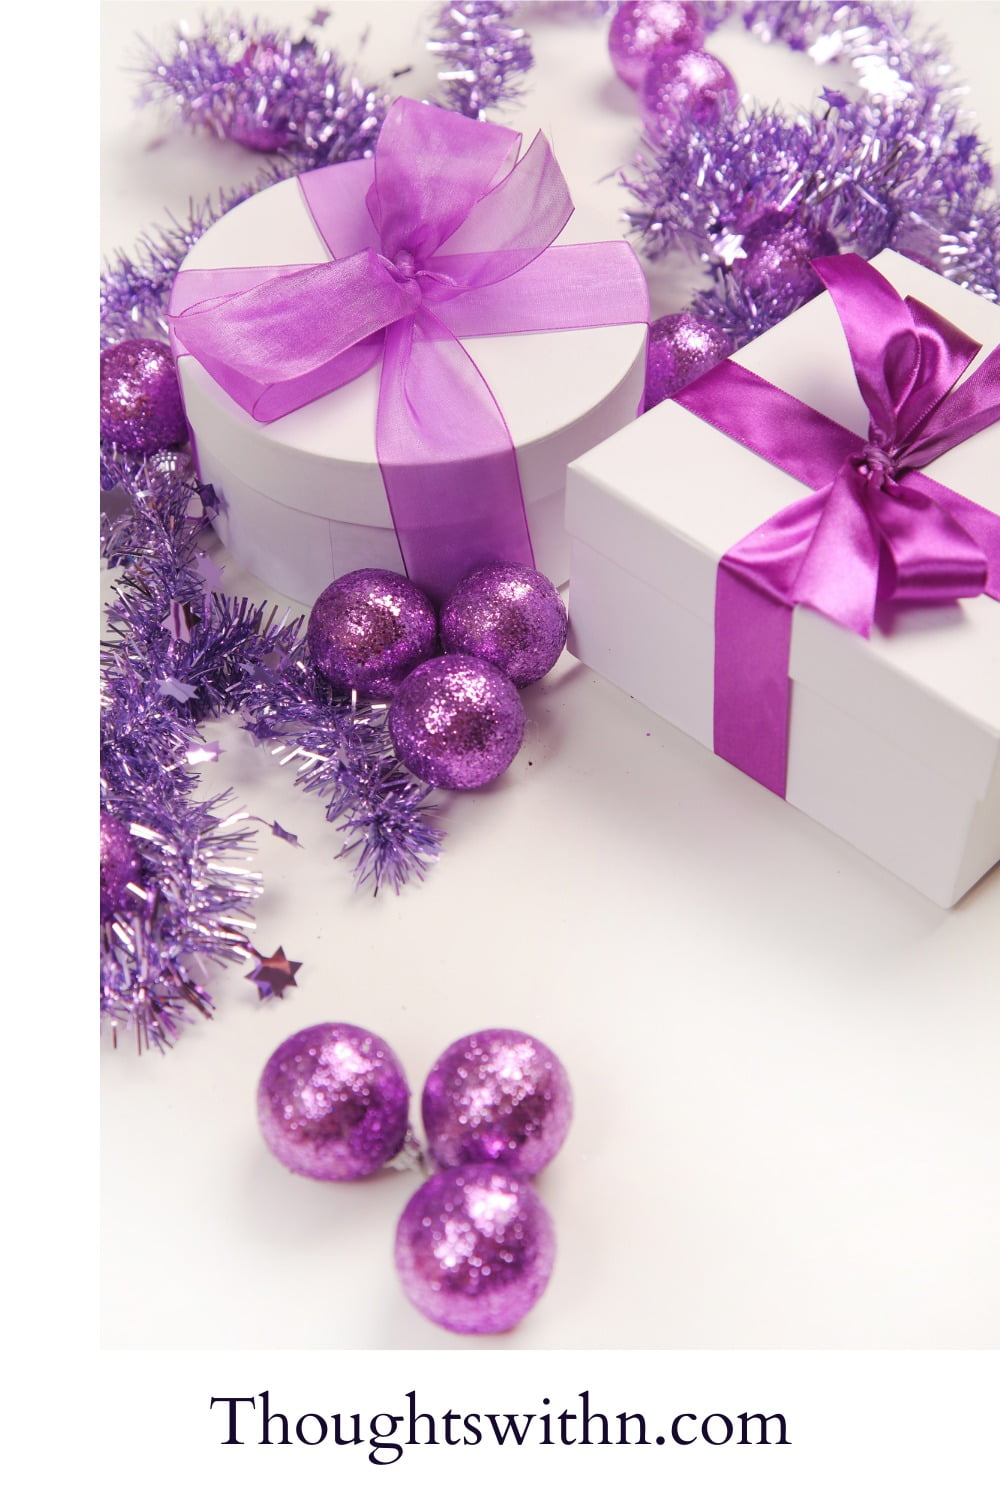 A white background with light purple ornamental balls and white presents with purple bow. Purple festive scene.